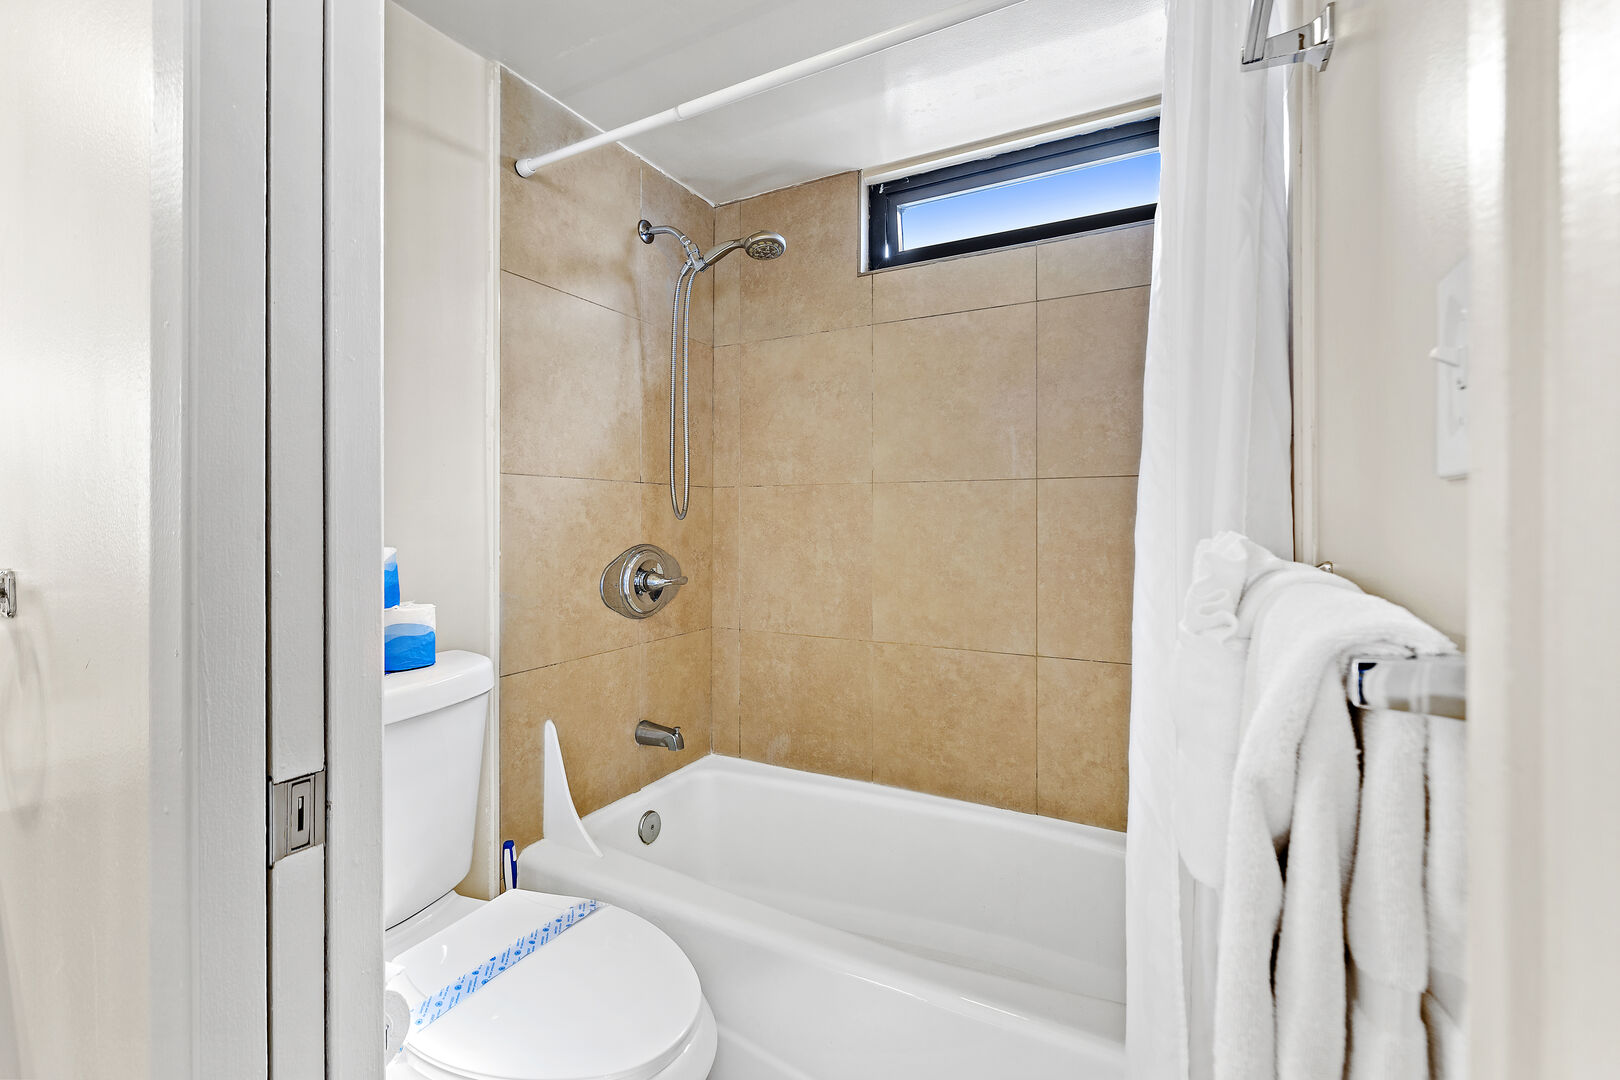 The full bathroom features a tub and shower combination!